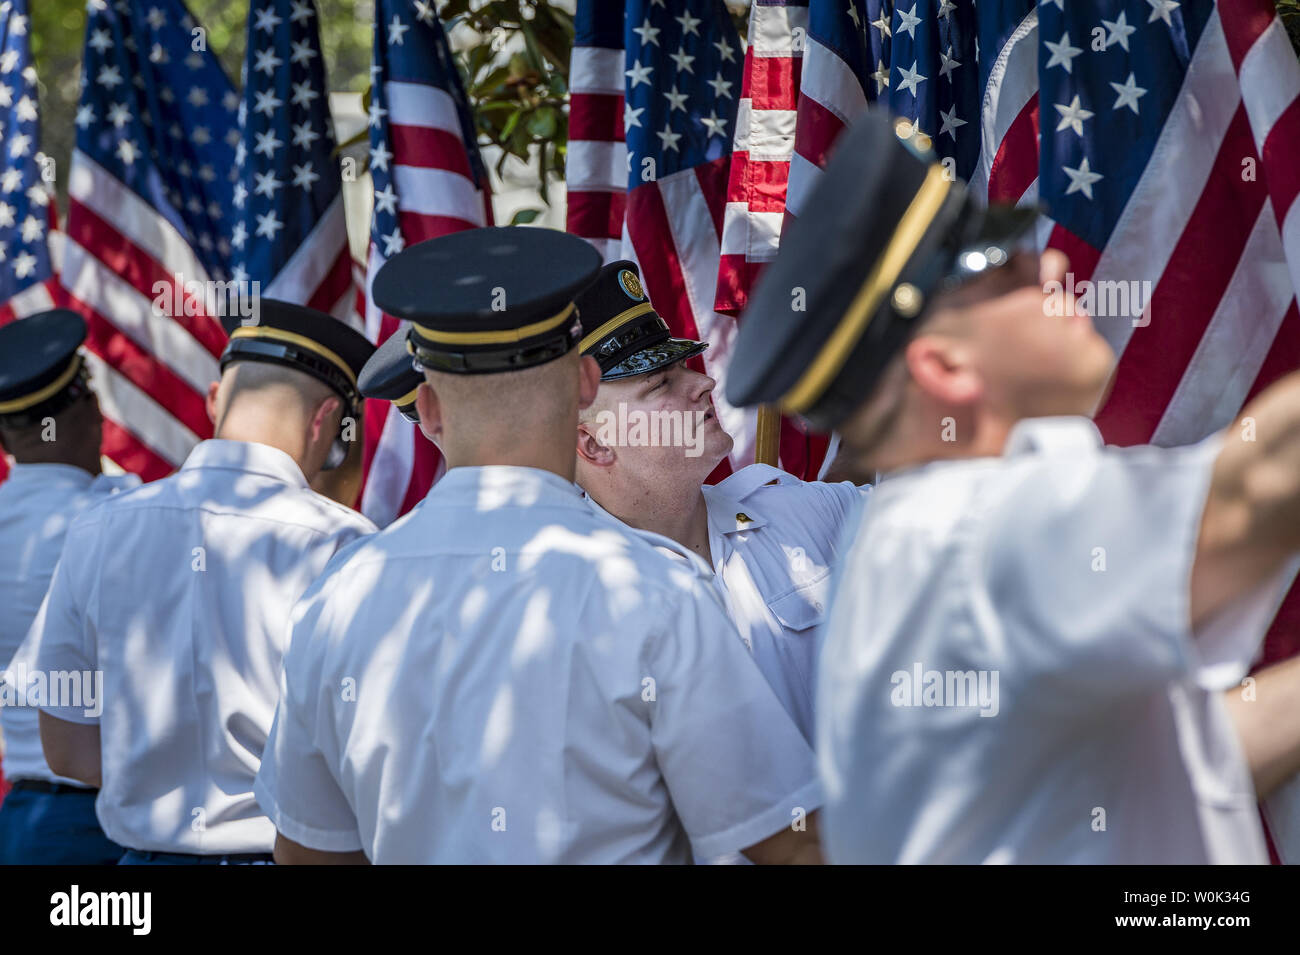 The US Army color guard prepares the flag backdrop for the 'Celebration of America' event on the South Lawn of the White House on June 5, 2018 in Washington, DC. The celebration is being staged as a replacement for a White House visit by the Super Bowl champion Philadelphia Eagles. Some of the team was planning on boycotting the event due to the President's stance on players kneeling during the National Anthem at NFL games, so Trump rescinded their invitation.      Photo by Pete Marovich/UPI Stock Photo